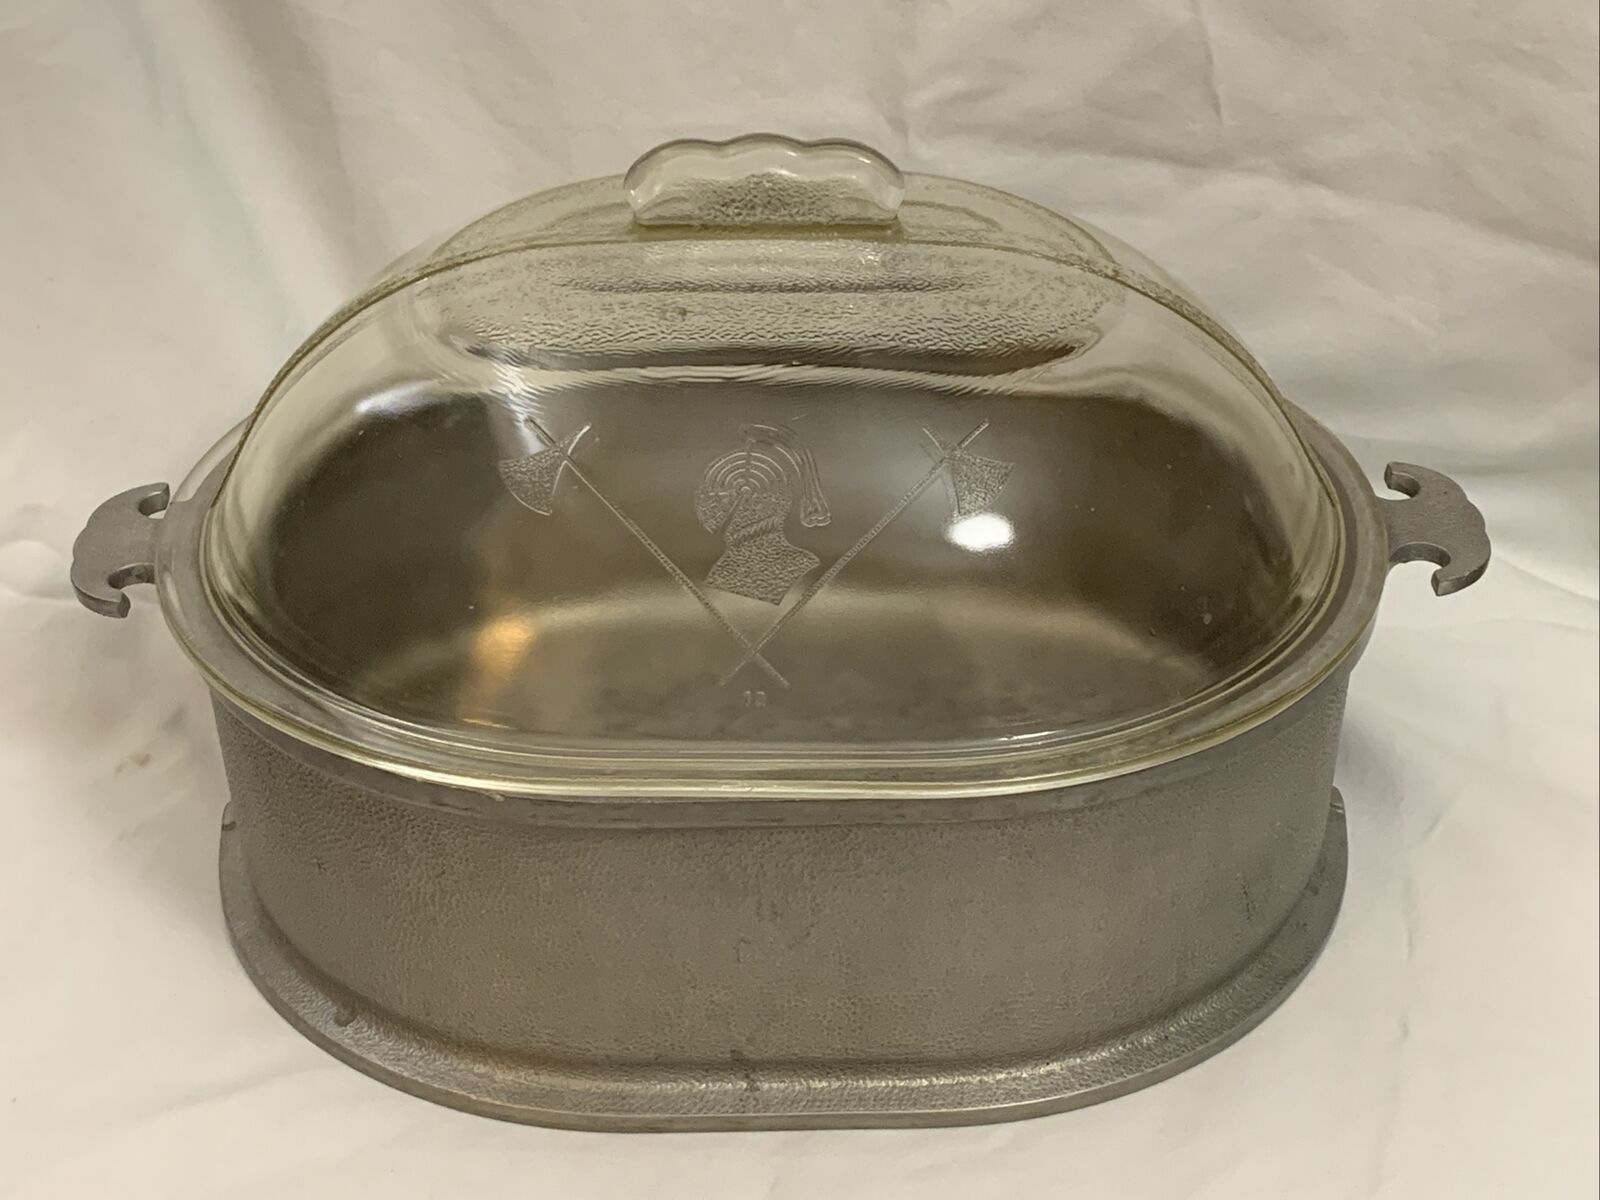 Vintage Guardian Service Hammered Aluminum Roaster Dutch Oven with Glass Lid